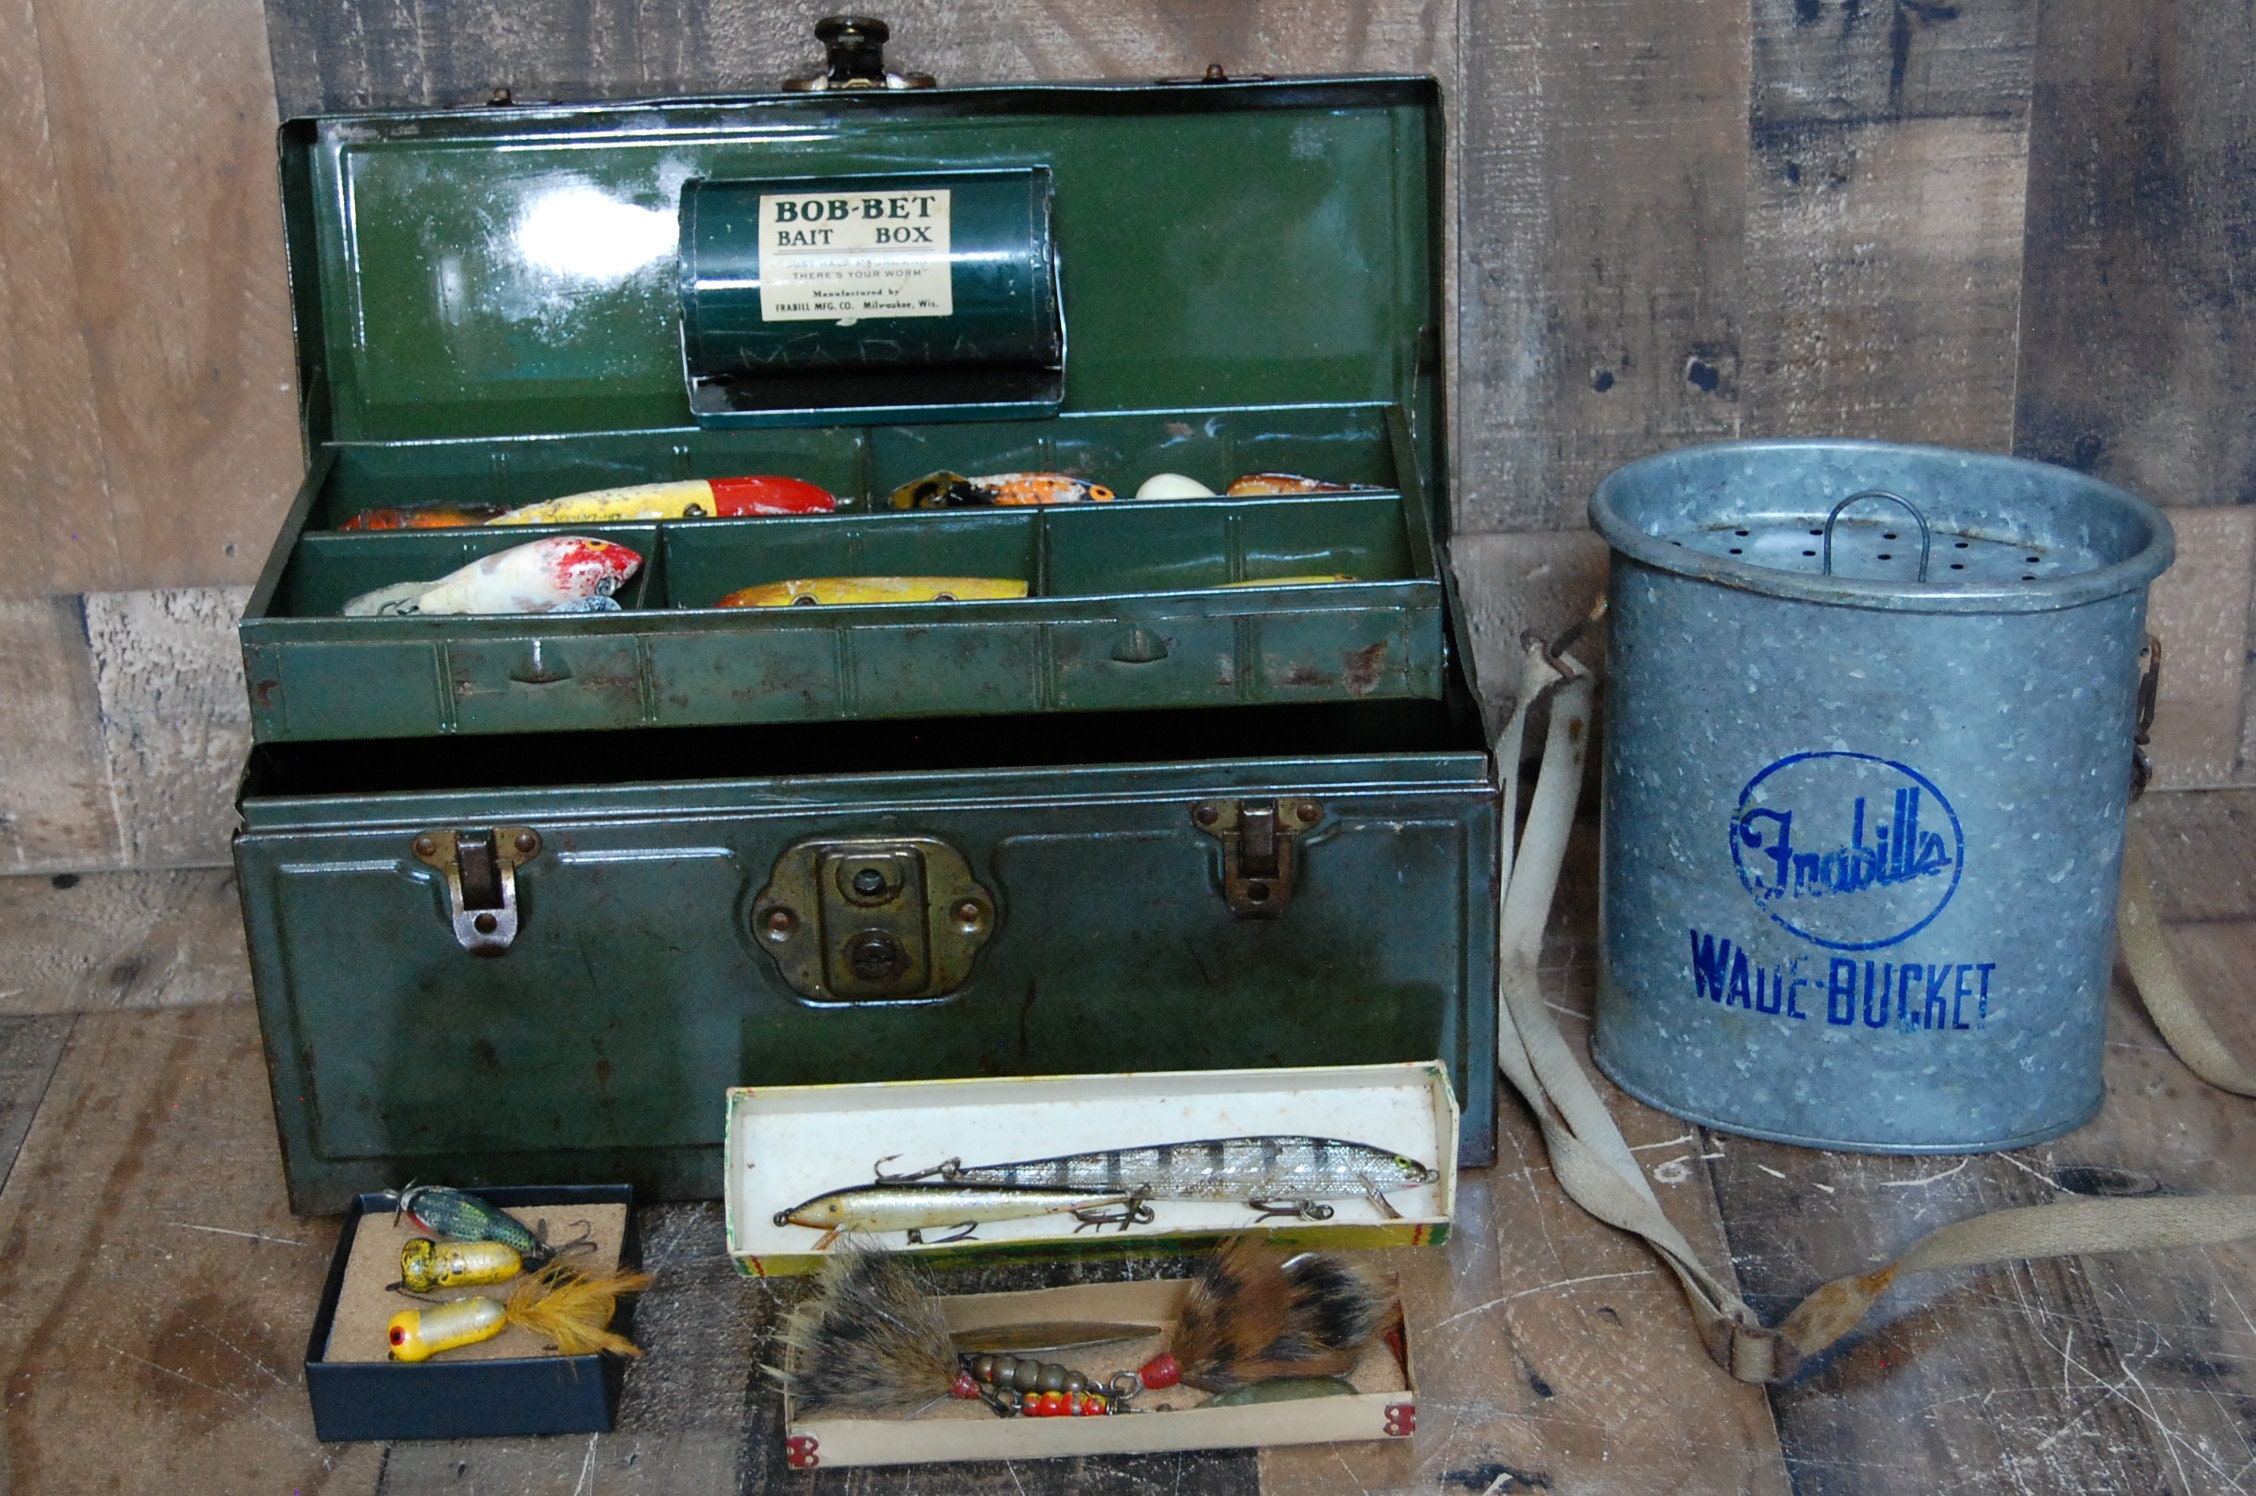 Vintage Green Metal Fishing Tackle Box Filled With Vintage Fishing Lures,  Fred Arborcast, Heddon, Garrett, Vintage Wood Lures With Glass Eye 